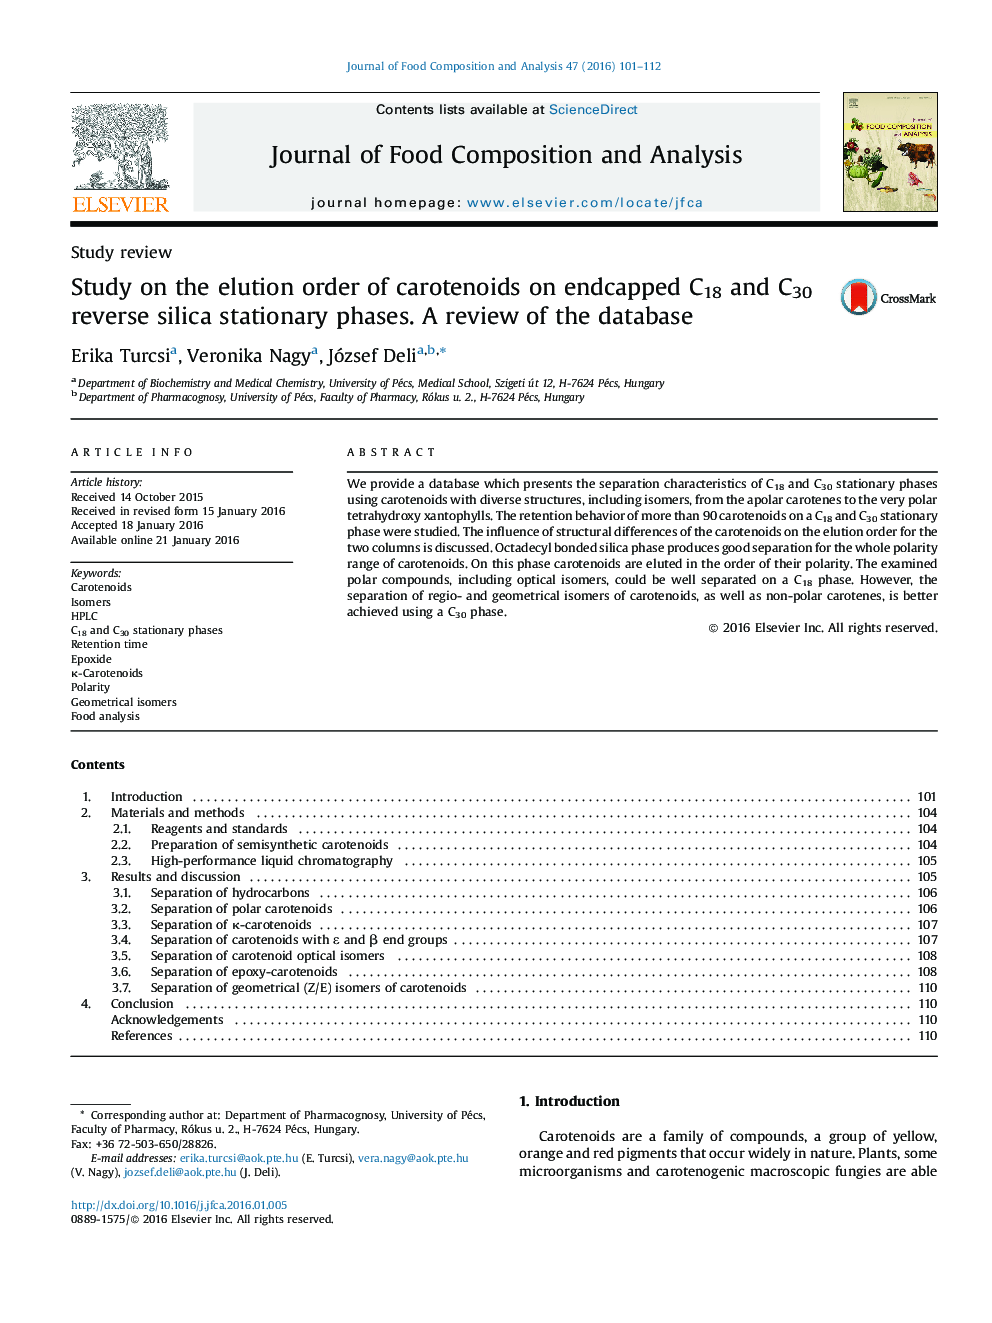 Study on the elution order of carotenoids on endcapped C18 and C30 reverse silica stationary phases. A review of the database